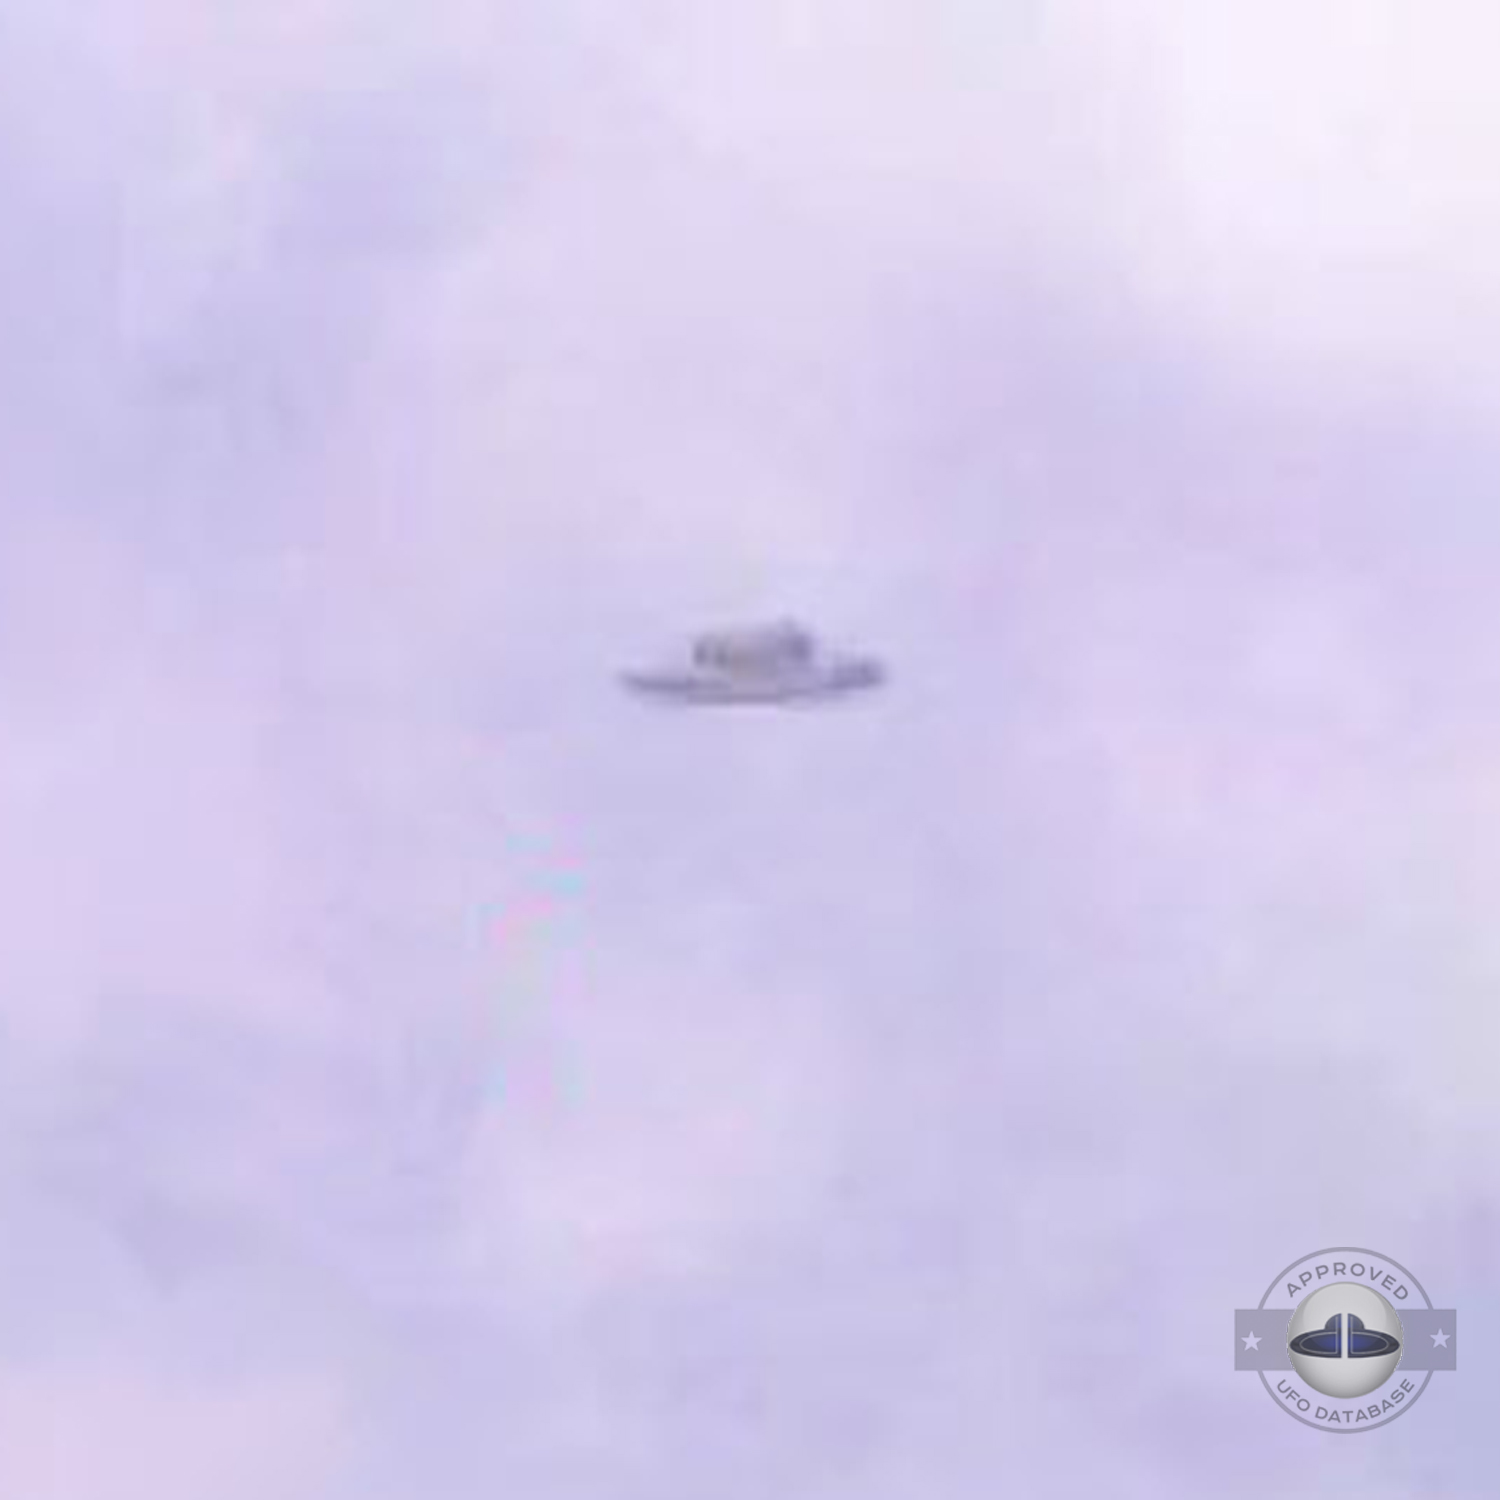 Hat Shaped UFO captured on picture in Shillong | India | August 2009 UFO Picture #224-3